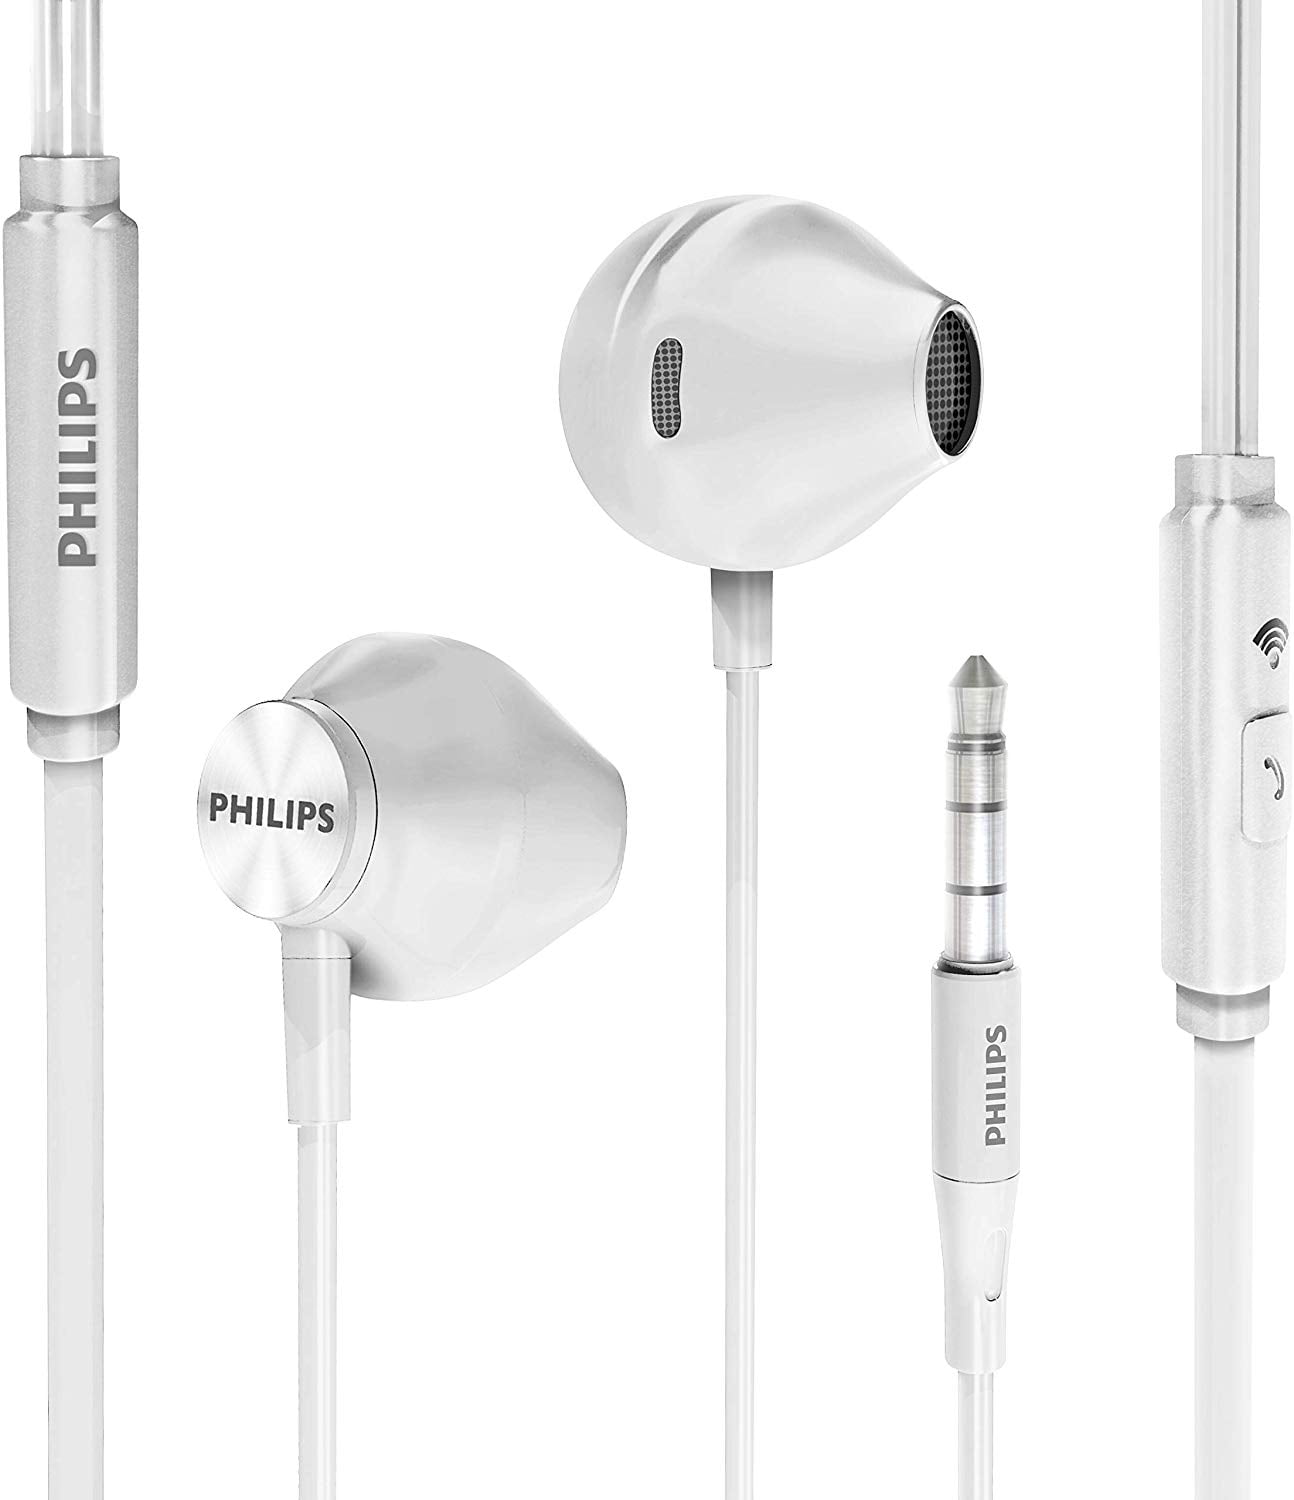 Philips TAUE101 Wired Headphones Earbuds with Microphone with Bass Clear Sound